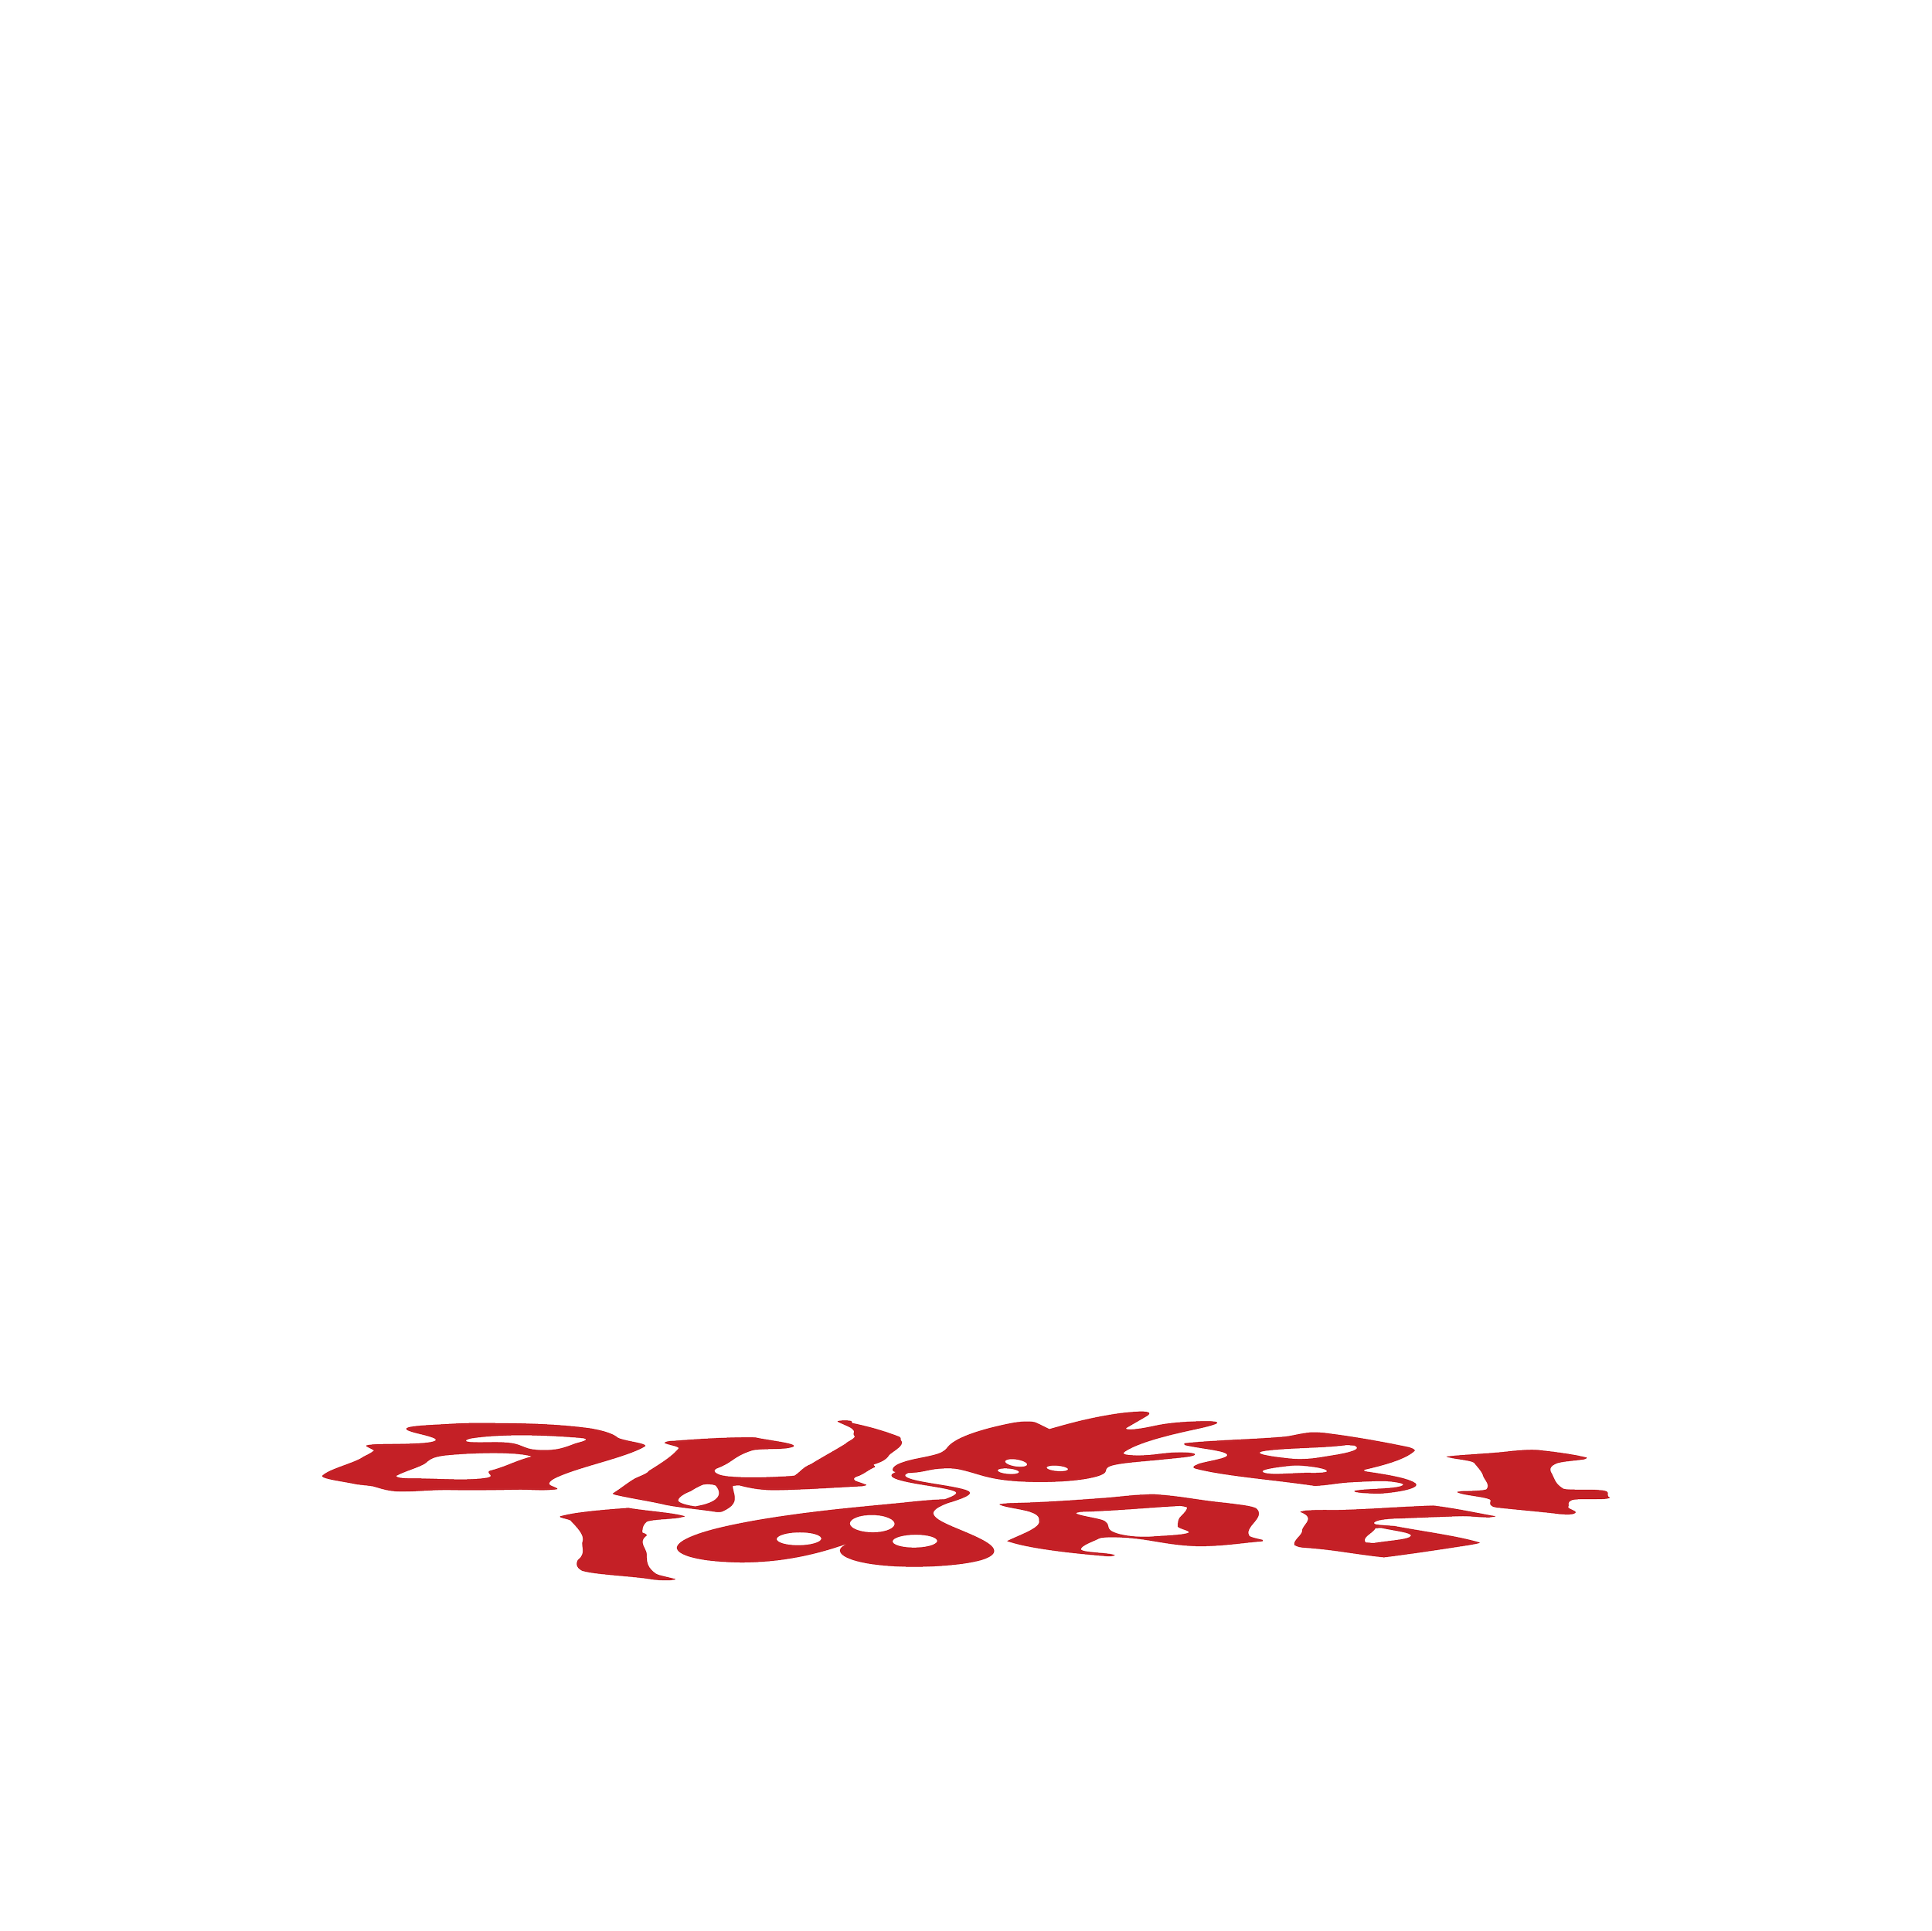 HOME — Love Ghost